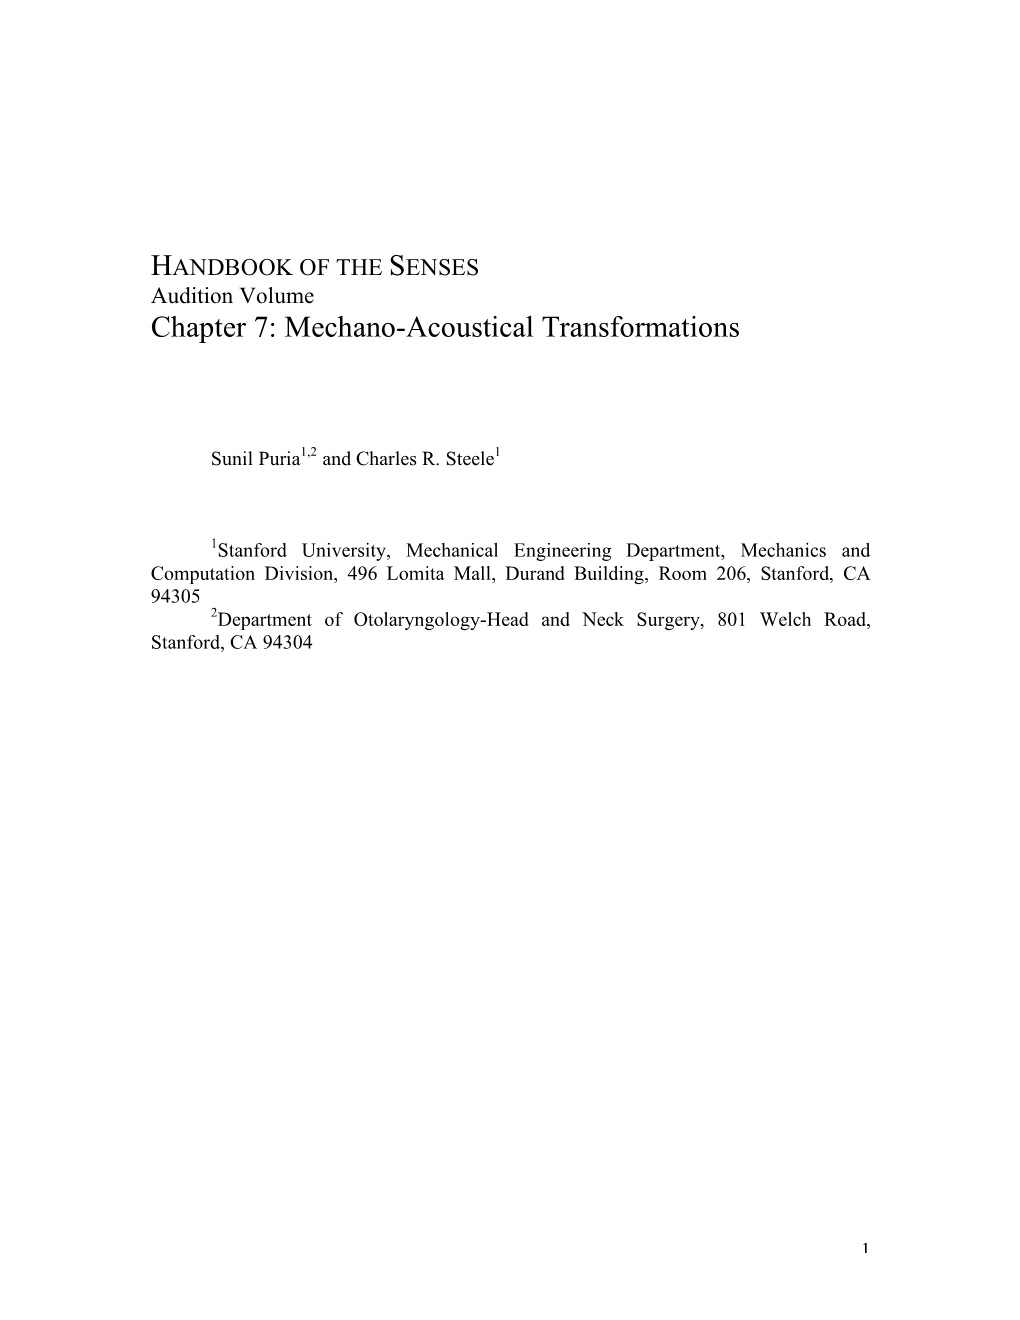 Chapter 7: Mechano-Acoustical Transformations